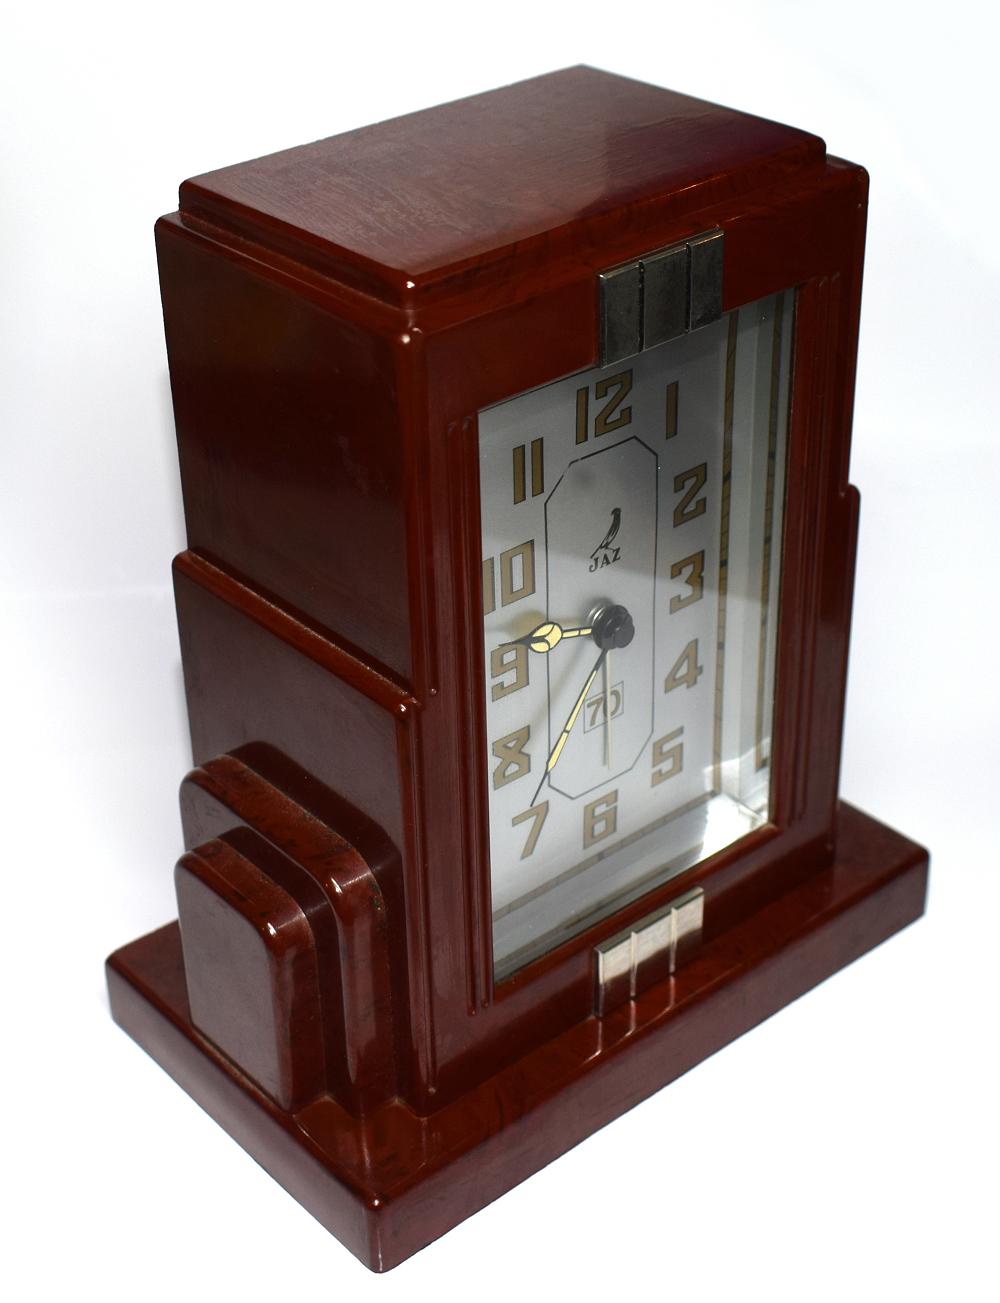 Fabulous Art Deco clock by Jaz a French clock maker. This clock is in a deep cherry red with black speckles and wonderful skyscraper shaped casing. The condition of the face is particularly good showing little to no signs of its true age. The